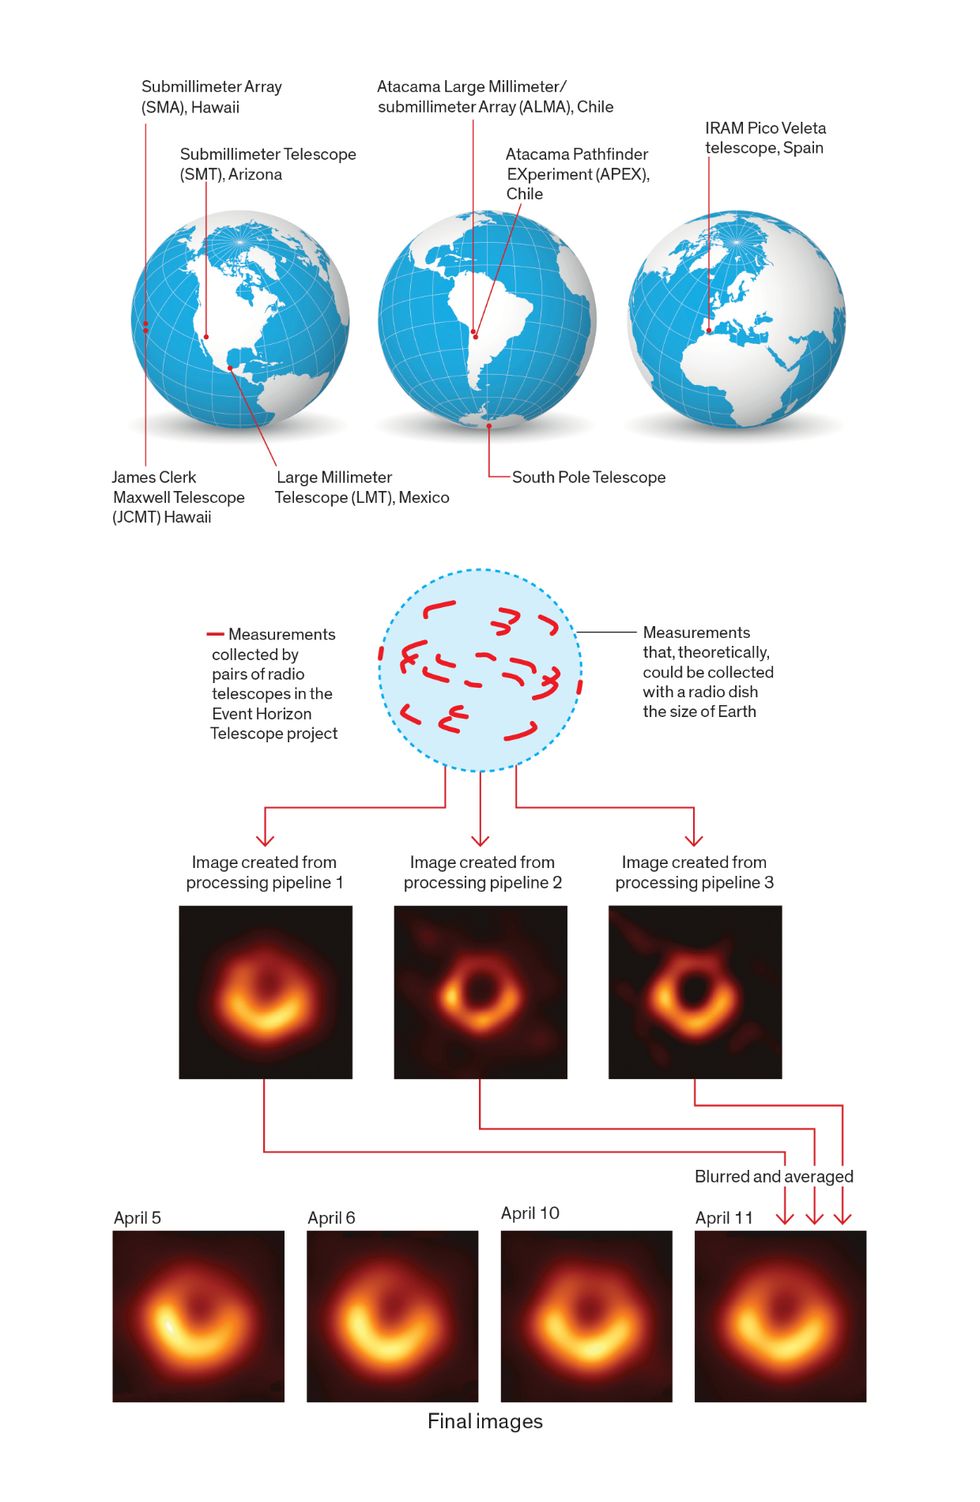 The measurements taken to construct these images of a black hole came from seven radio telescopes spread around the world. An eighth (at the South Pole) aided in the calibration of these measurements. Newly developed algorithms and supercomputers were used to correlate the observed signals to make measurements and reconstruct the images from these measurements.